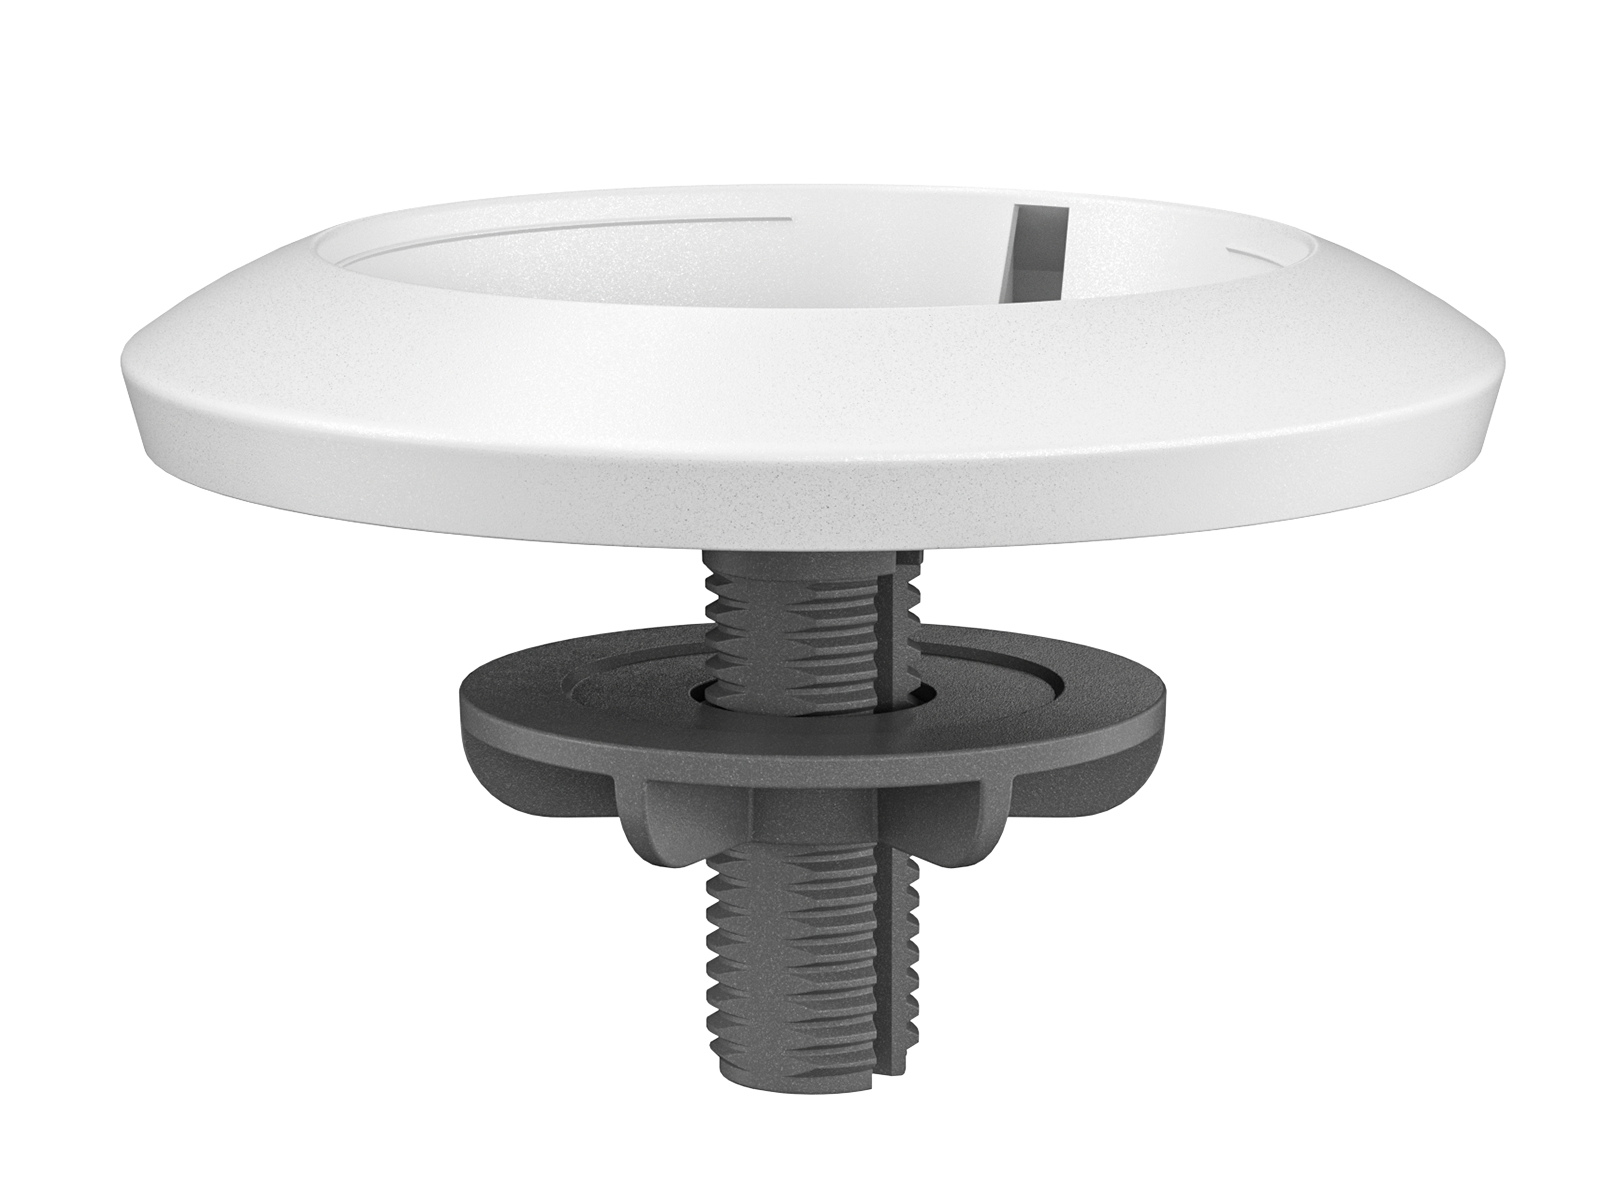  Rally Mic Pod table/ceiling mount - OFF-WHITE - WW